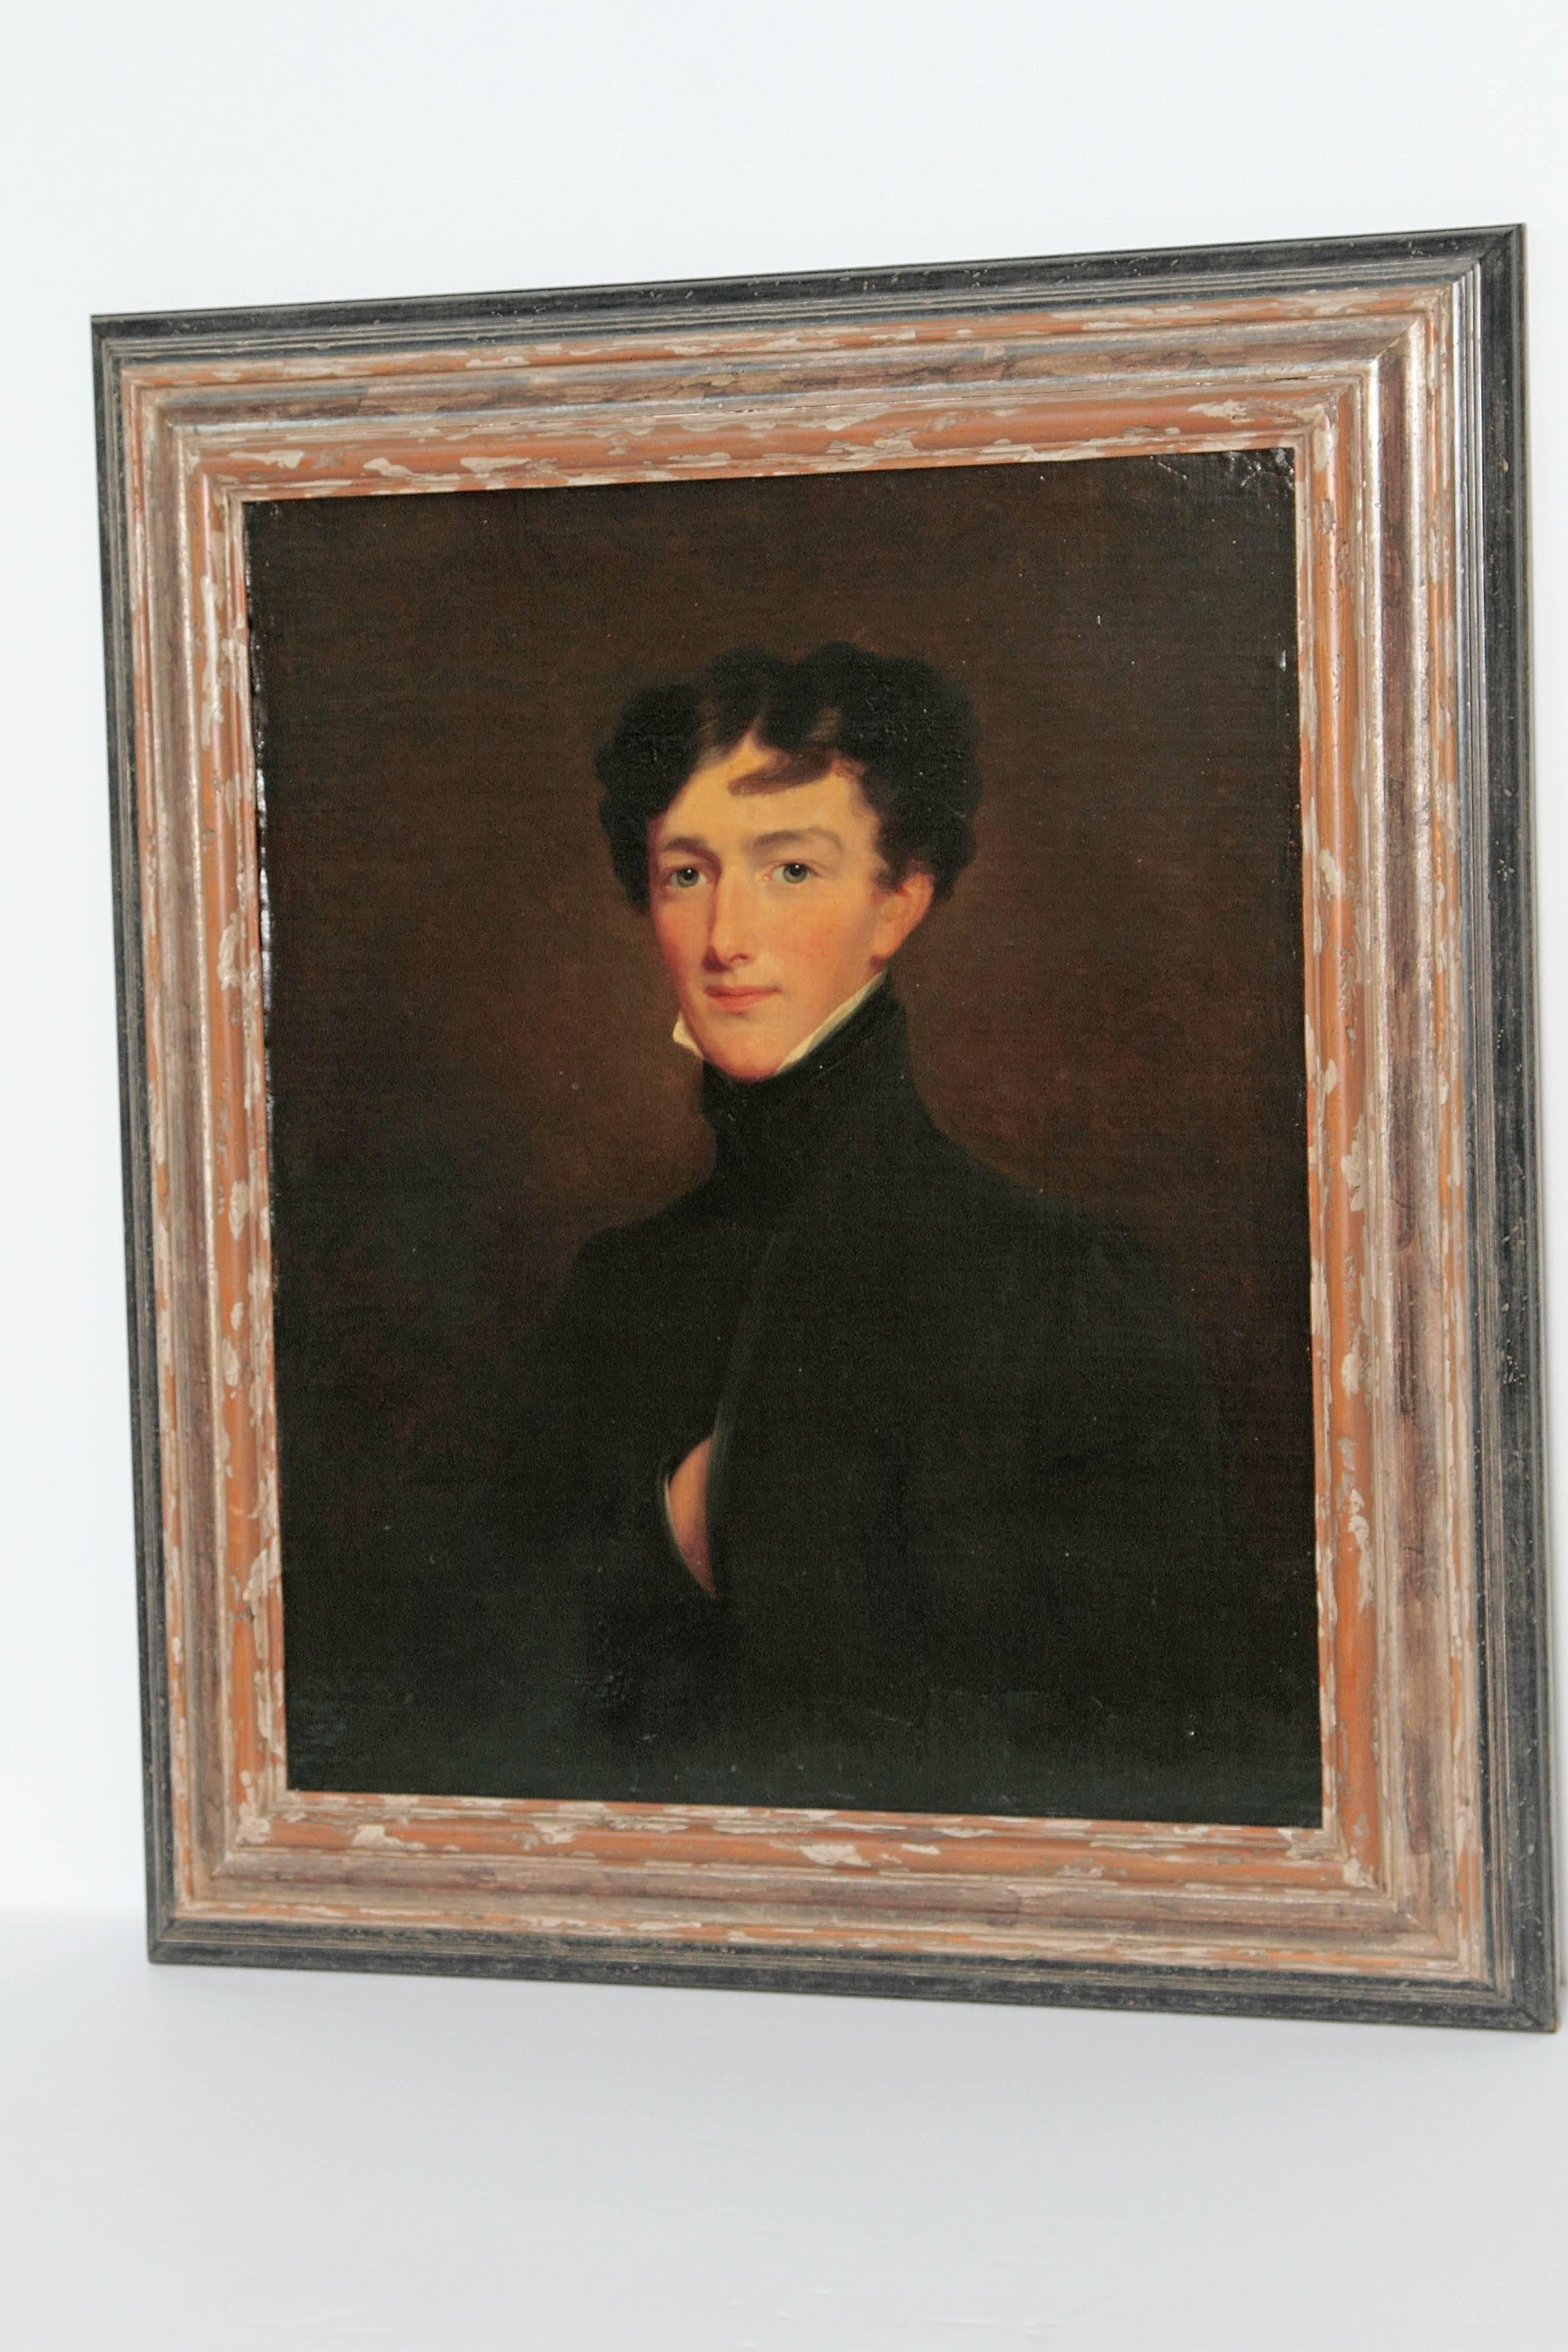 Large framed portrait of a young English gentleman, circa 1820s, labels on reverse refer to Richard Budd, son of Henry Budd, who died in 1830 at the age of 24.

the prosperous Budd Family owned houses and property in Russell Square, London, Marine